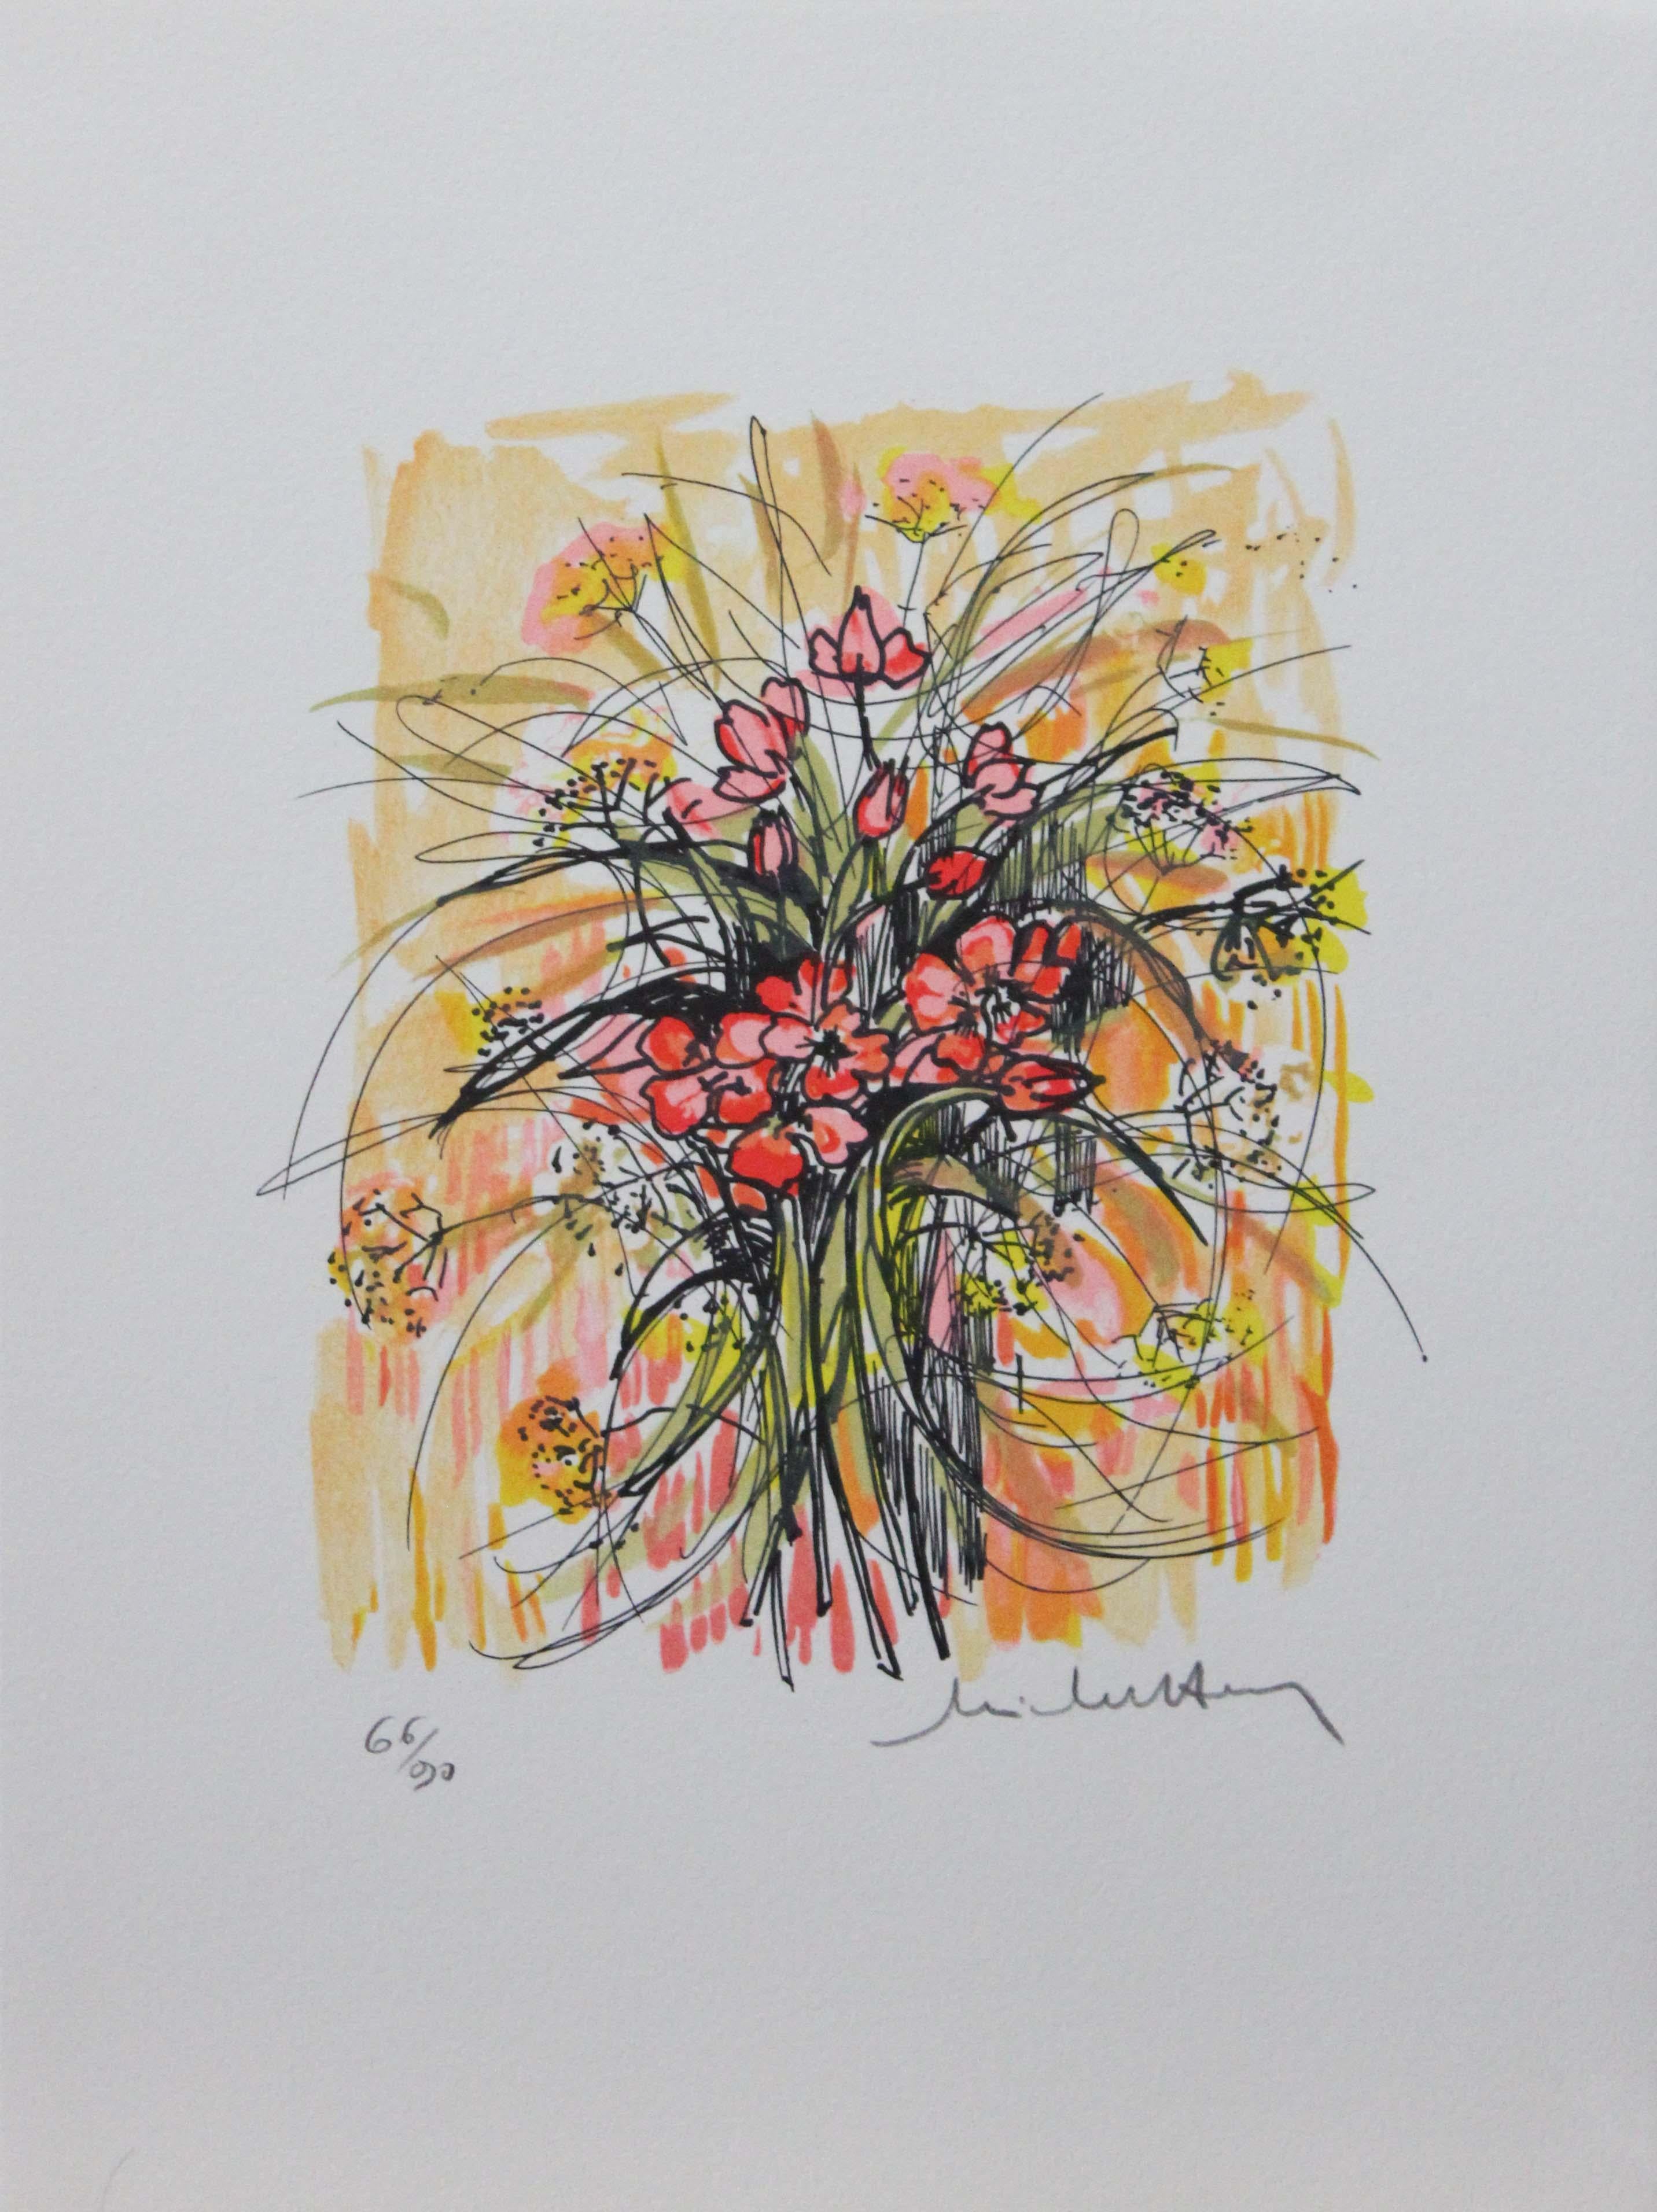 Unknown Still-Life Print - Le Fleurs #3-Limited Edition Print, Artist Signature is Illegible